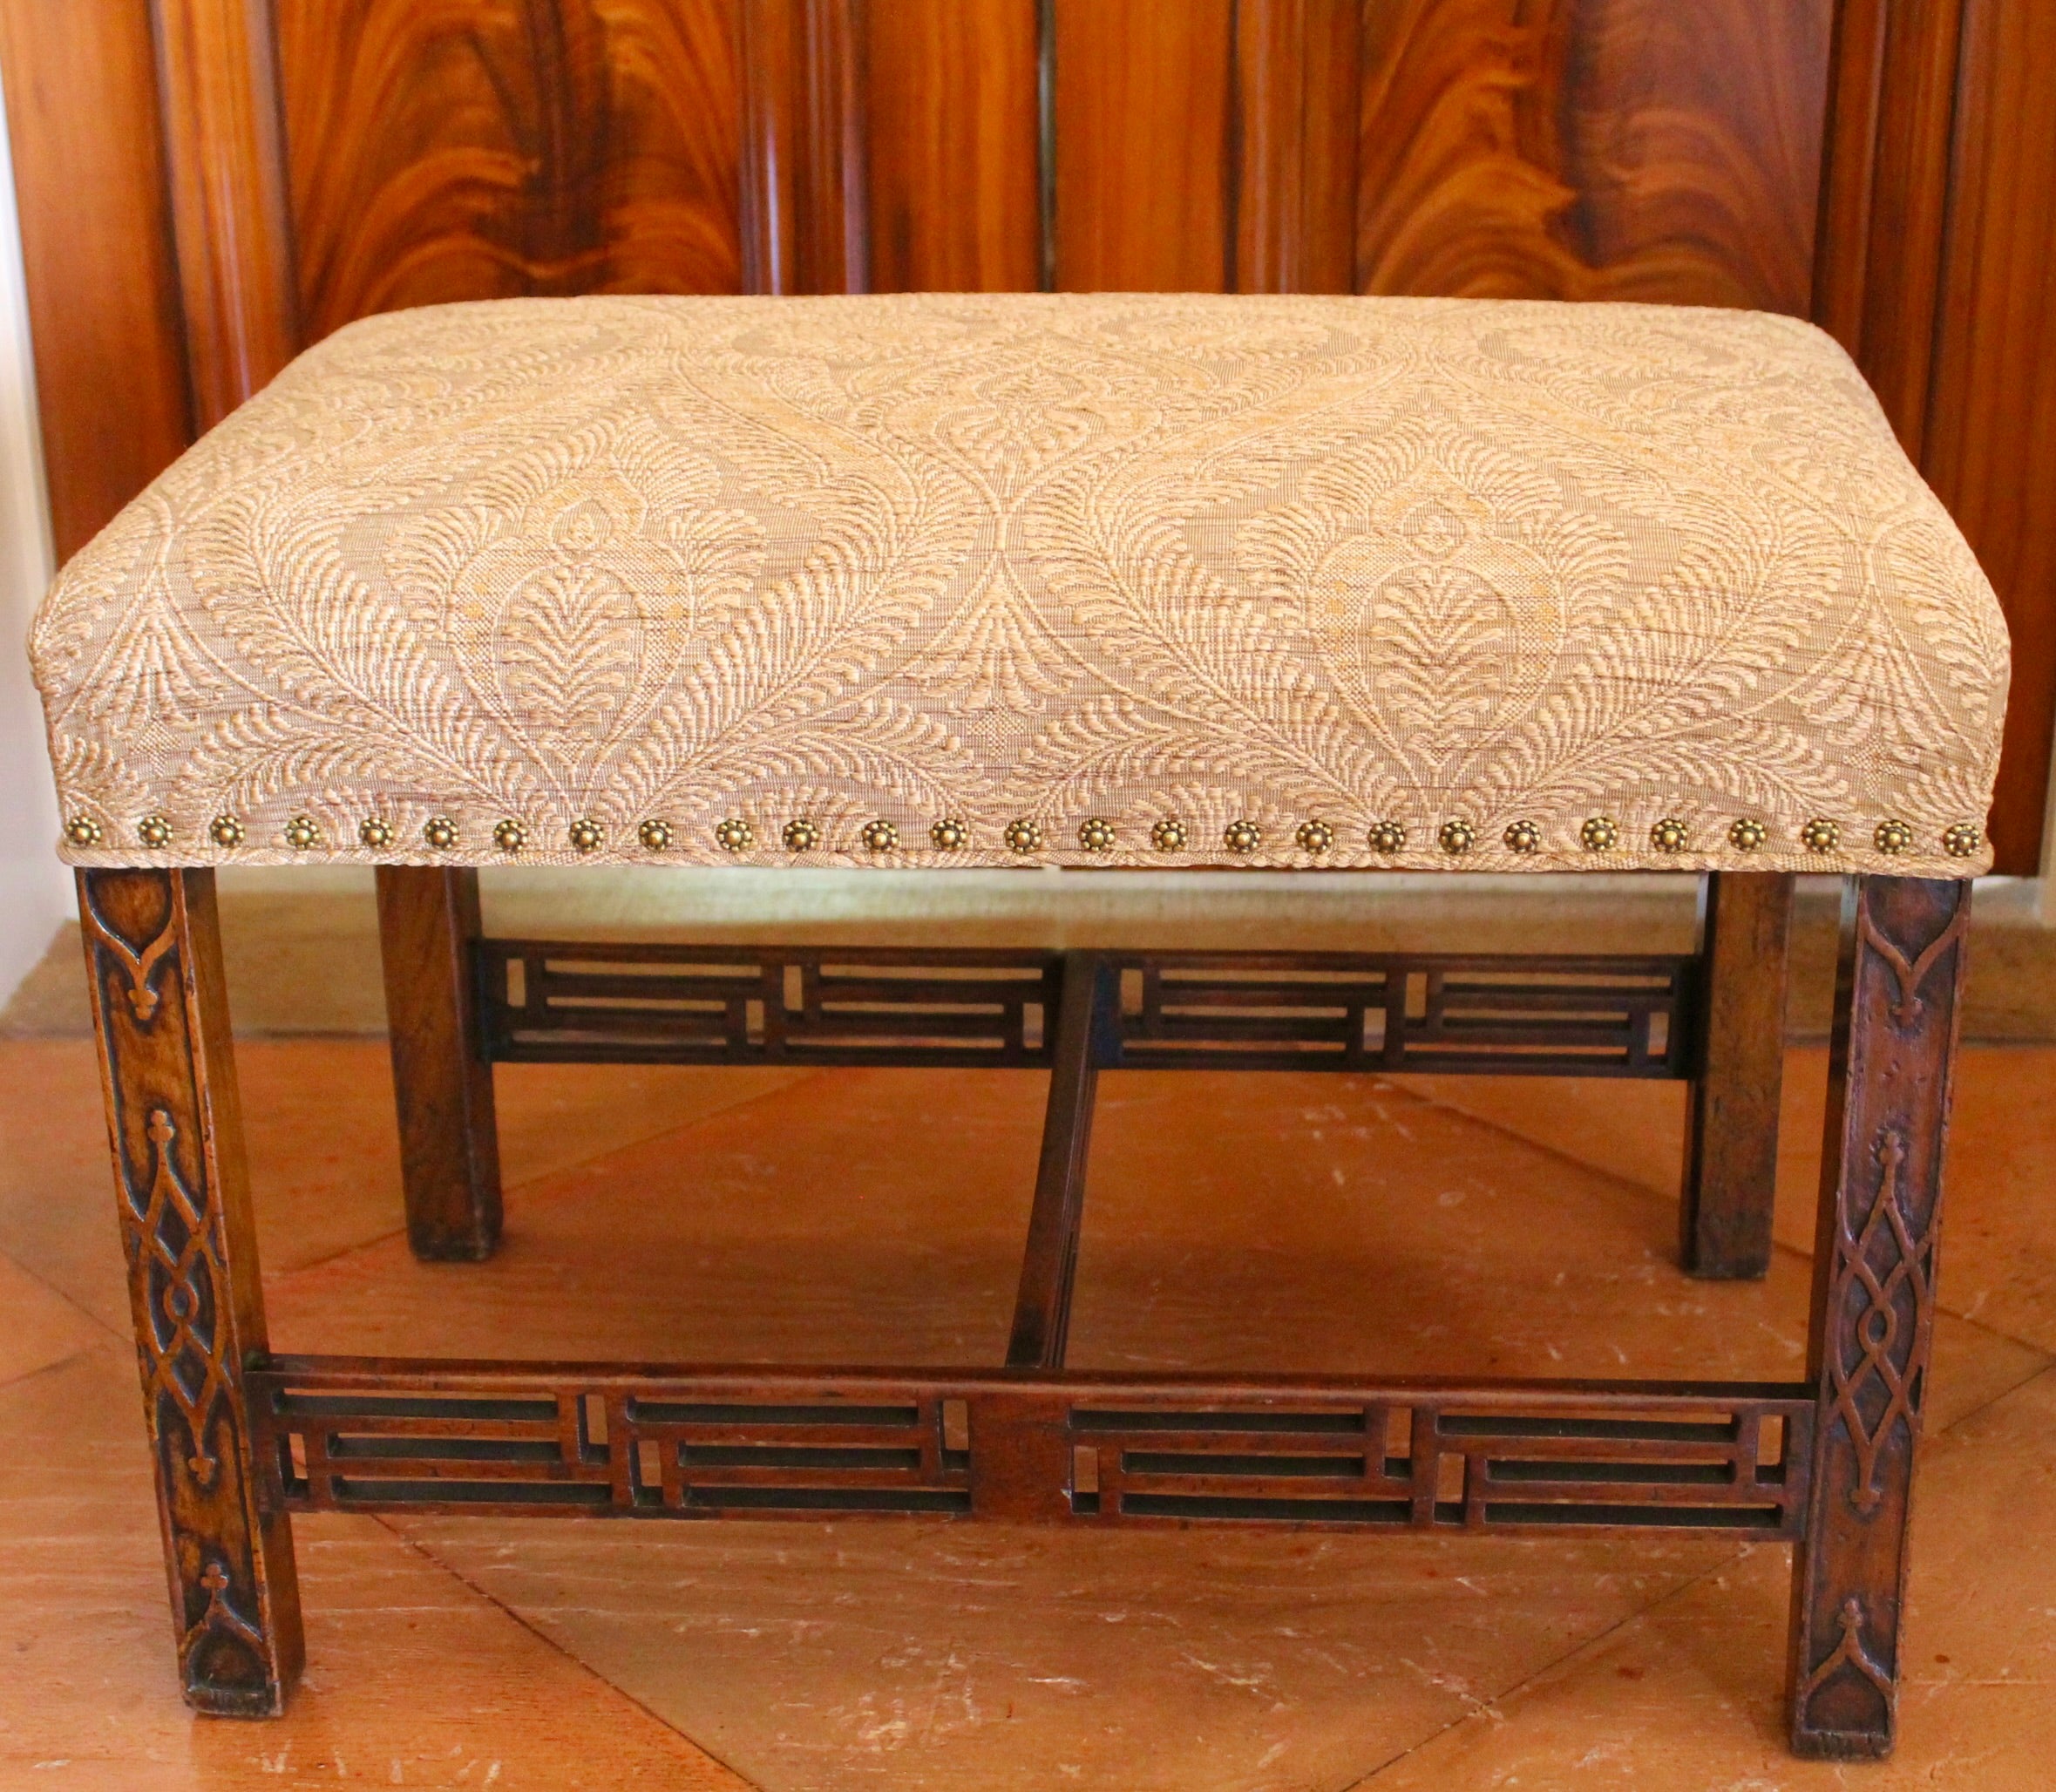 A very good English mahogany bench with blind fret carved legs connected by unusually complex open fret Chinese Chippendale fret stretchers. Freshly upholstered in a chic caramel tan woven fabric and further embellished with brass rosette form